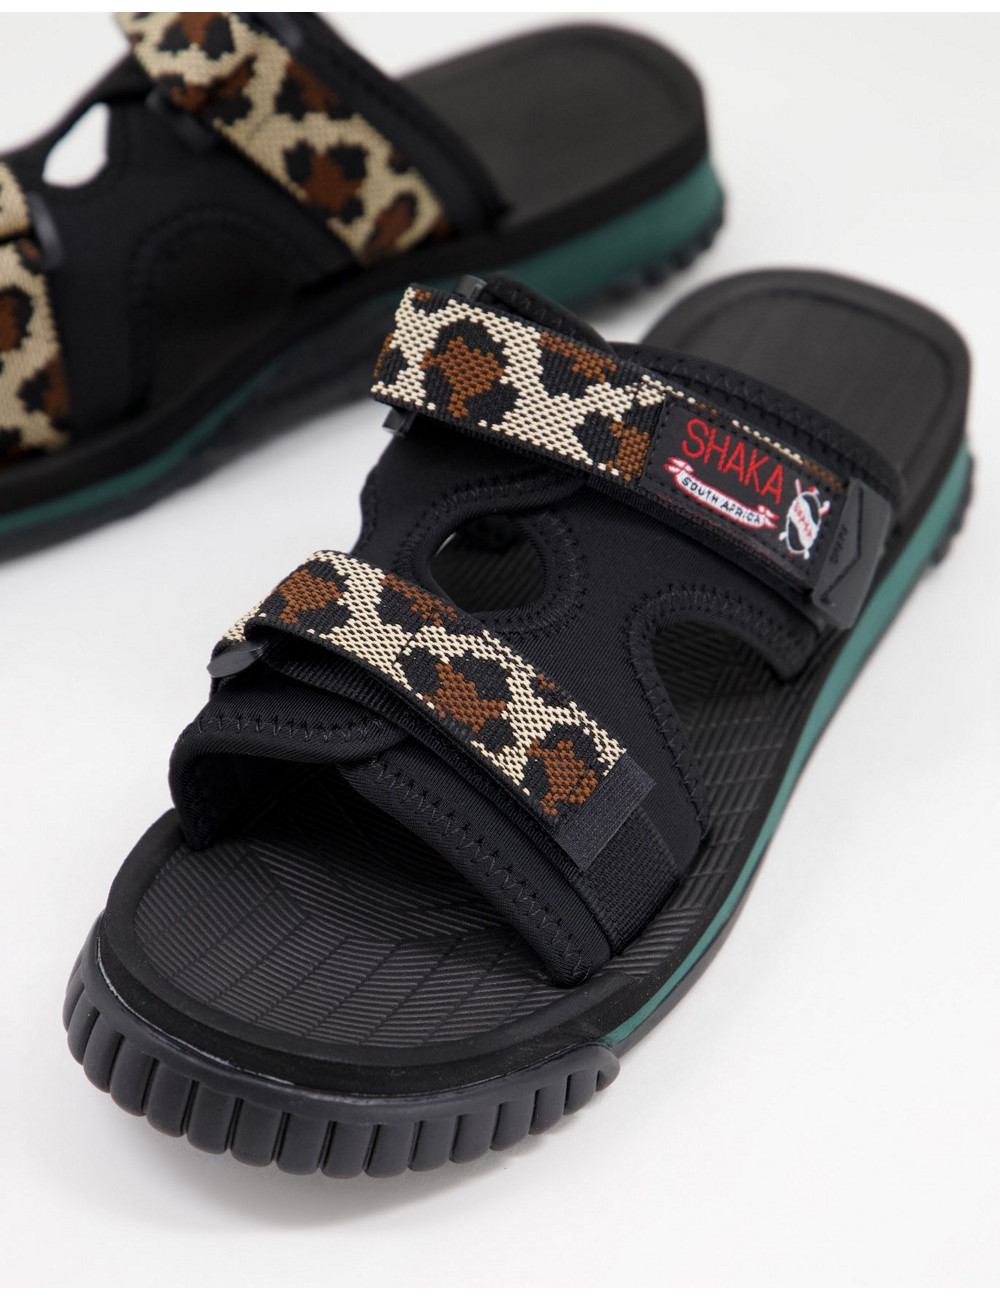 Shaka chill out sliders in...